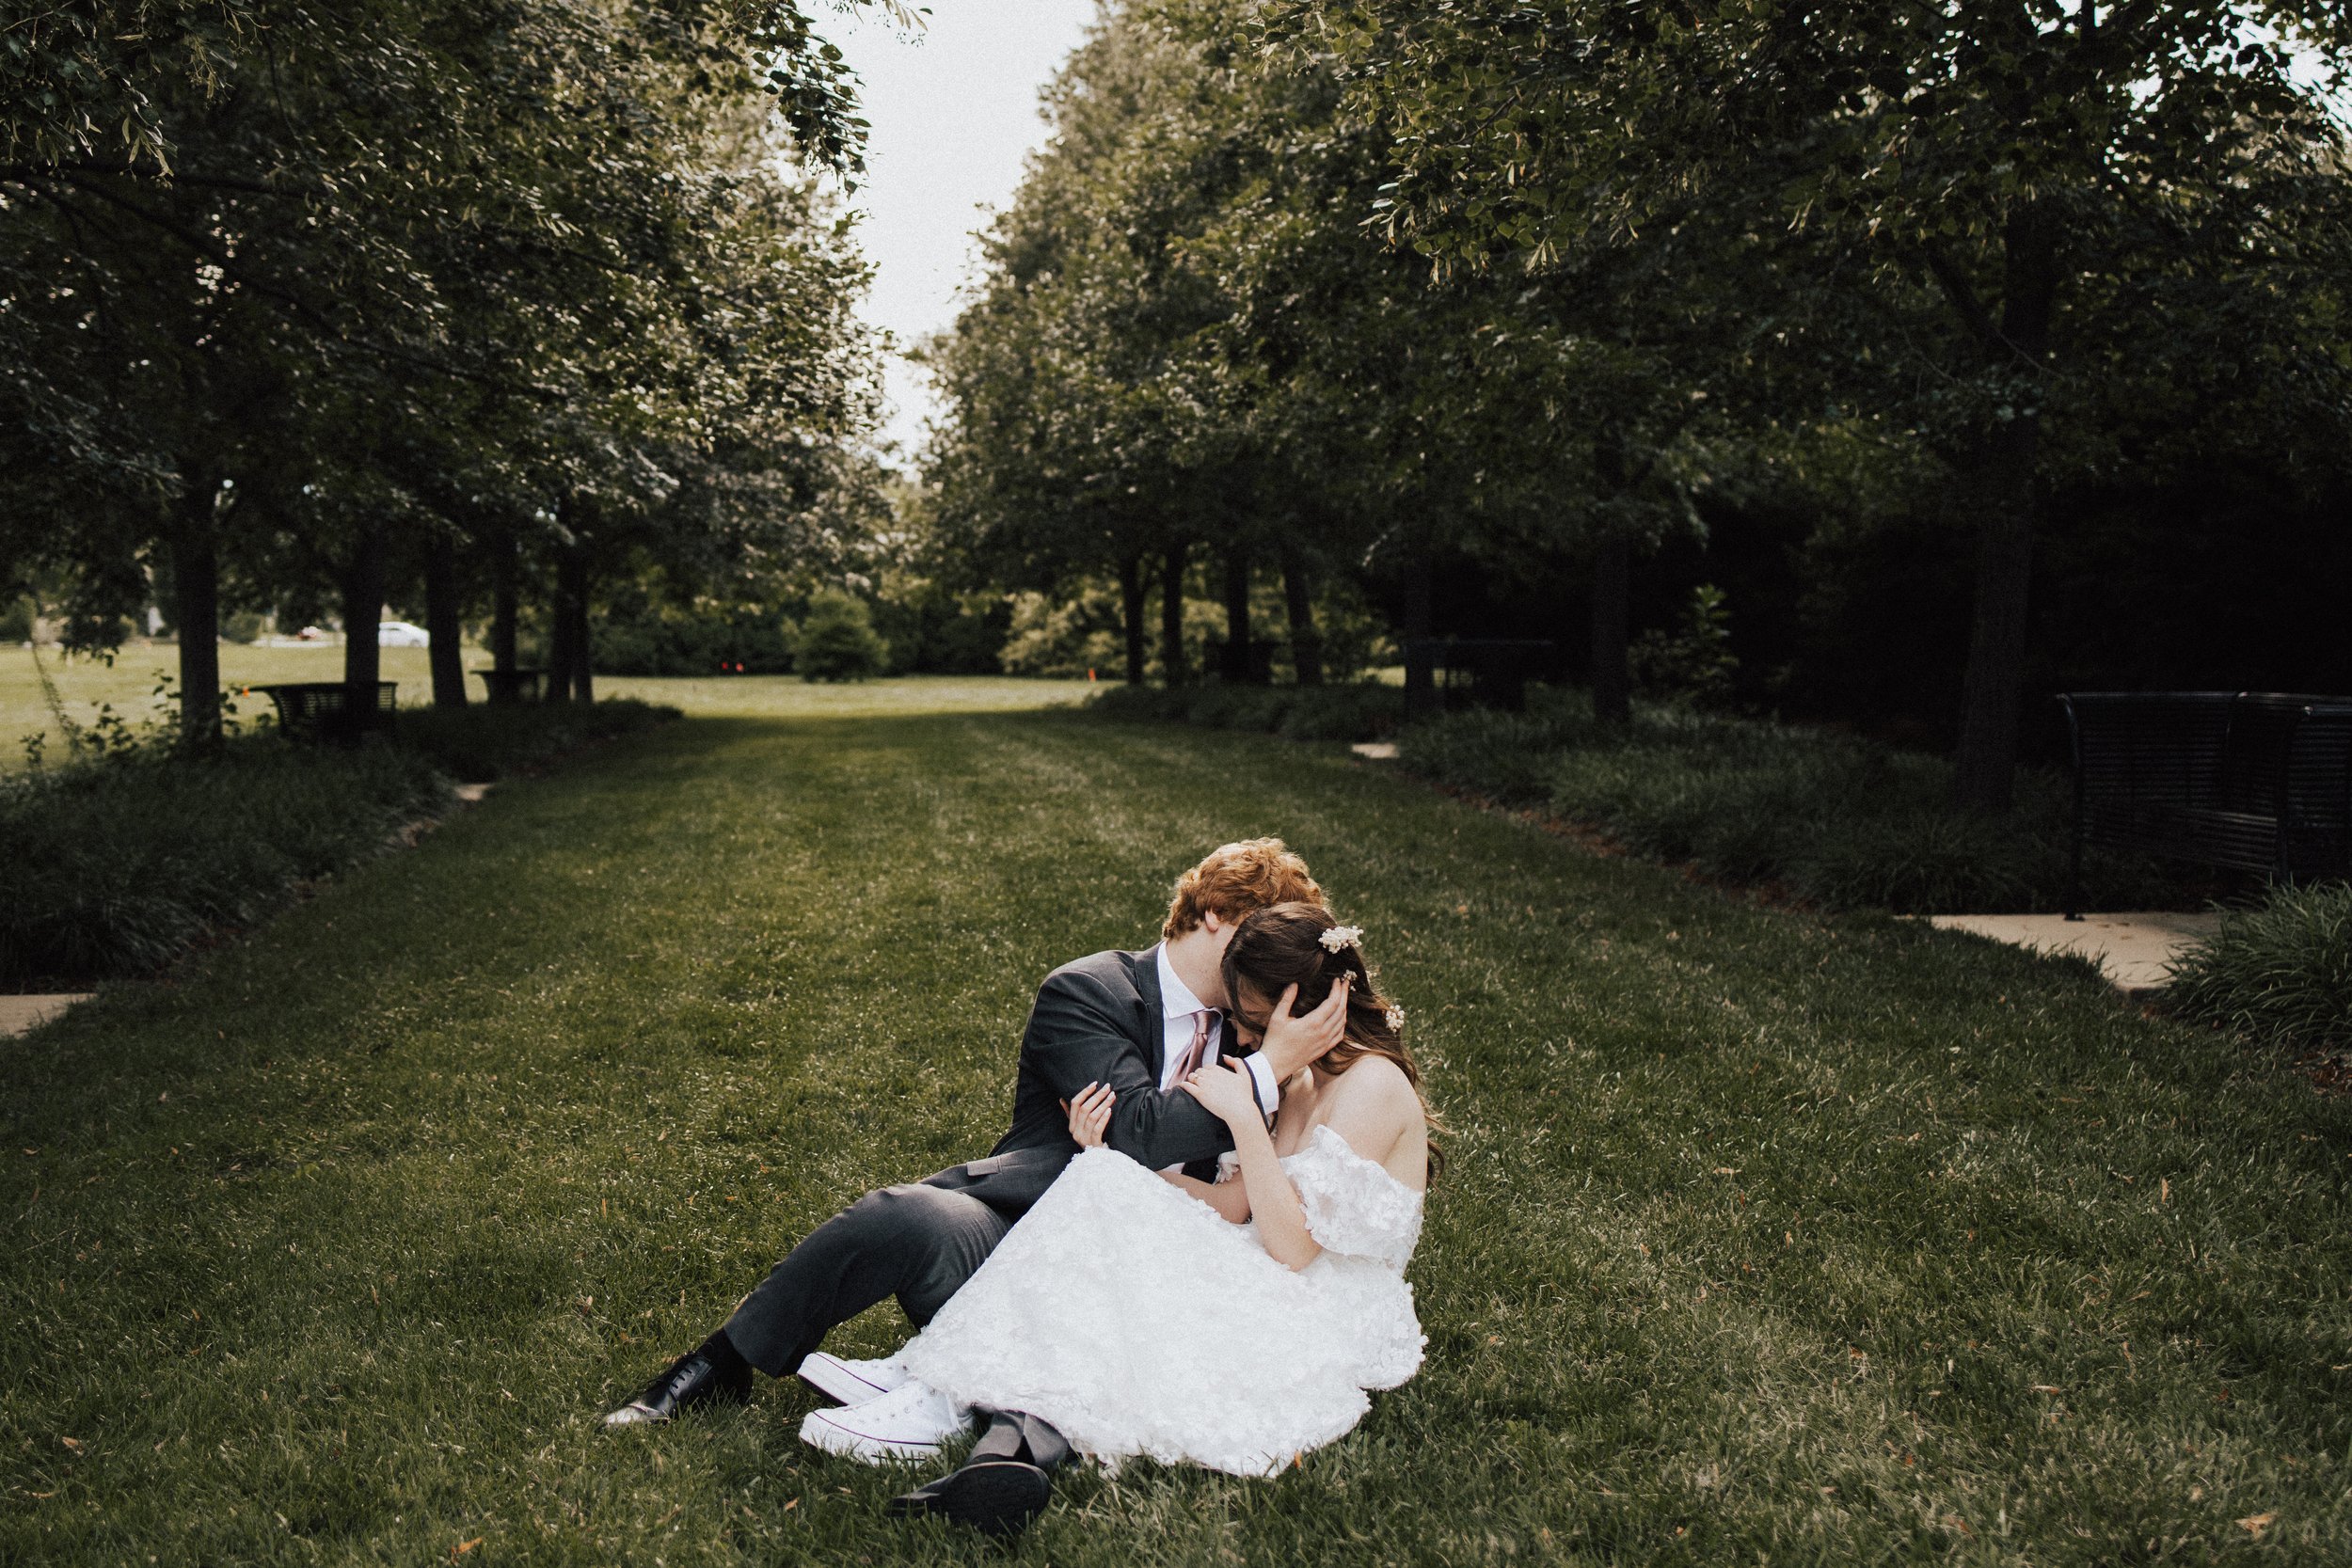 Bride and Groom sitting in grass, tangled in each other surrounded by beautiful trees.